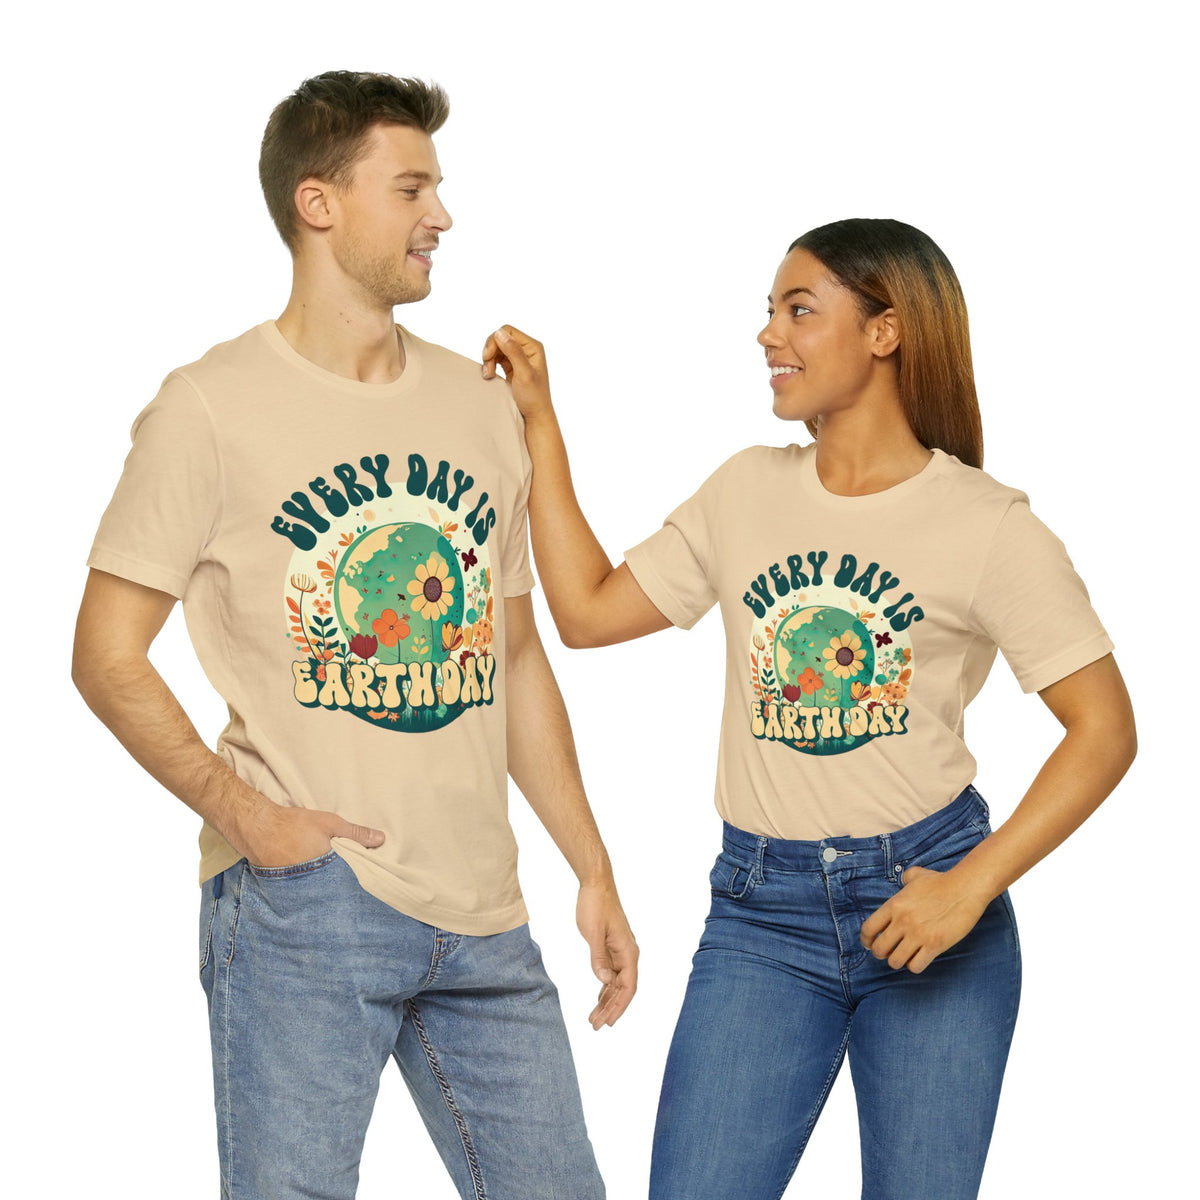 Every Day Is Earth Day Shirt | Mother Earth Flower shirt | Nature Shirt | Gift For Her | Super Soft Shirt | Unisex Jersey T-shirt